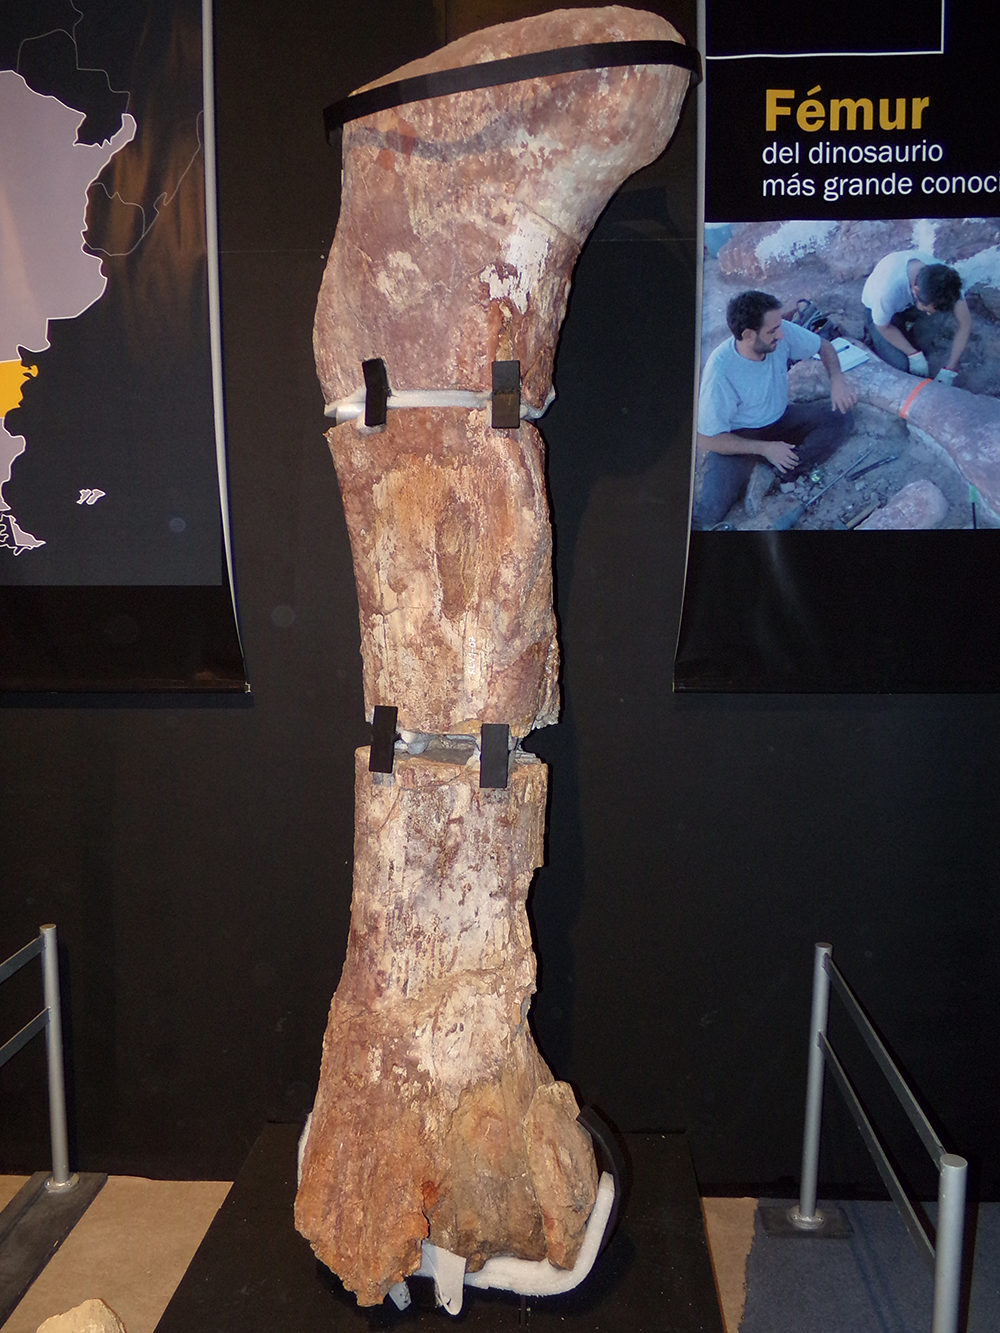 The massive femur of Patagotitan mayorum (compare with inset photograph of two individuals collecting this bone).